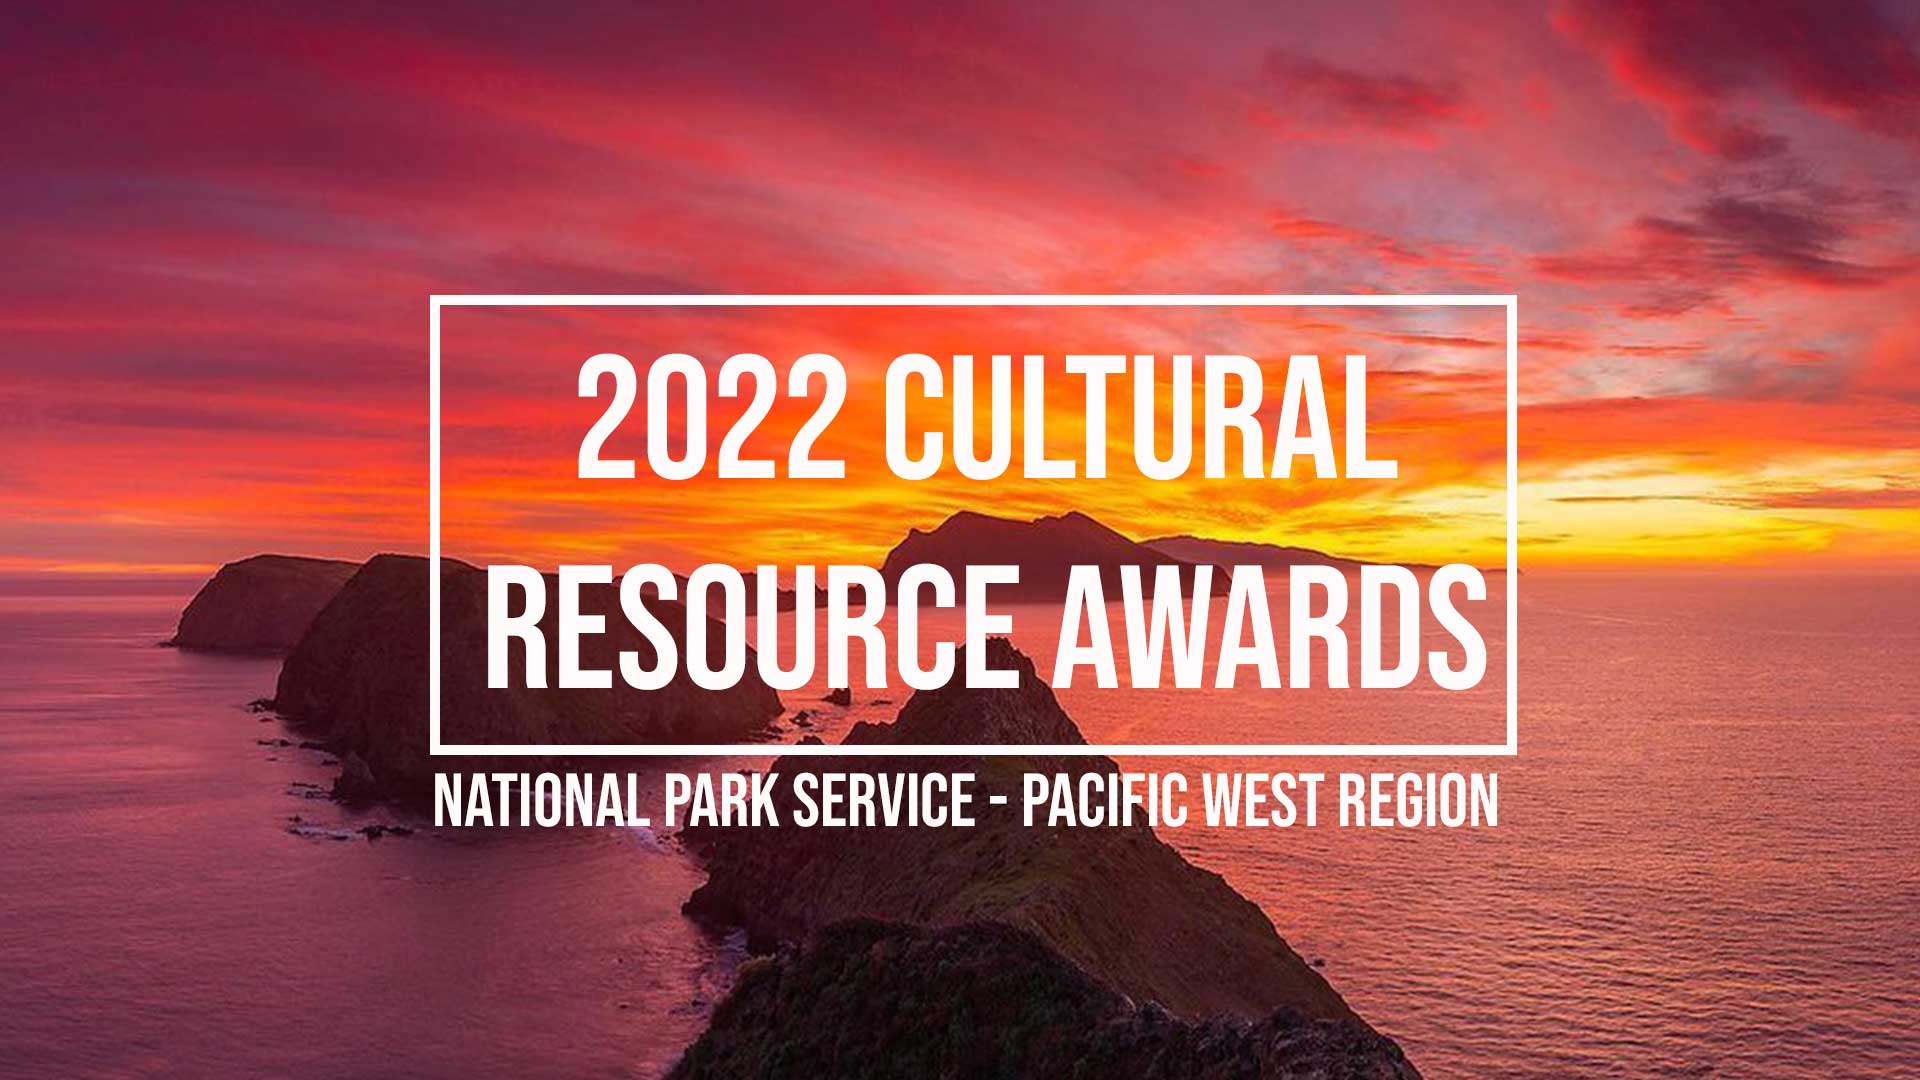 Deep pink sunset over rocky islands in Pacific Ocean. Reads “2022 Cultural Resource Awards. National Park Service – Pacific West Region”